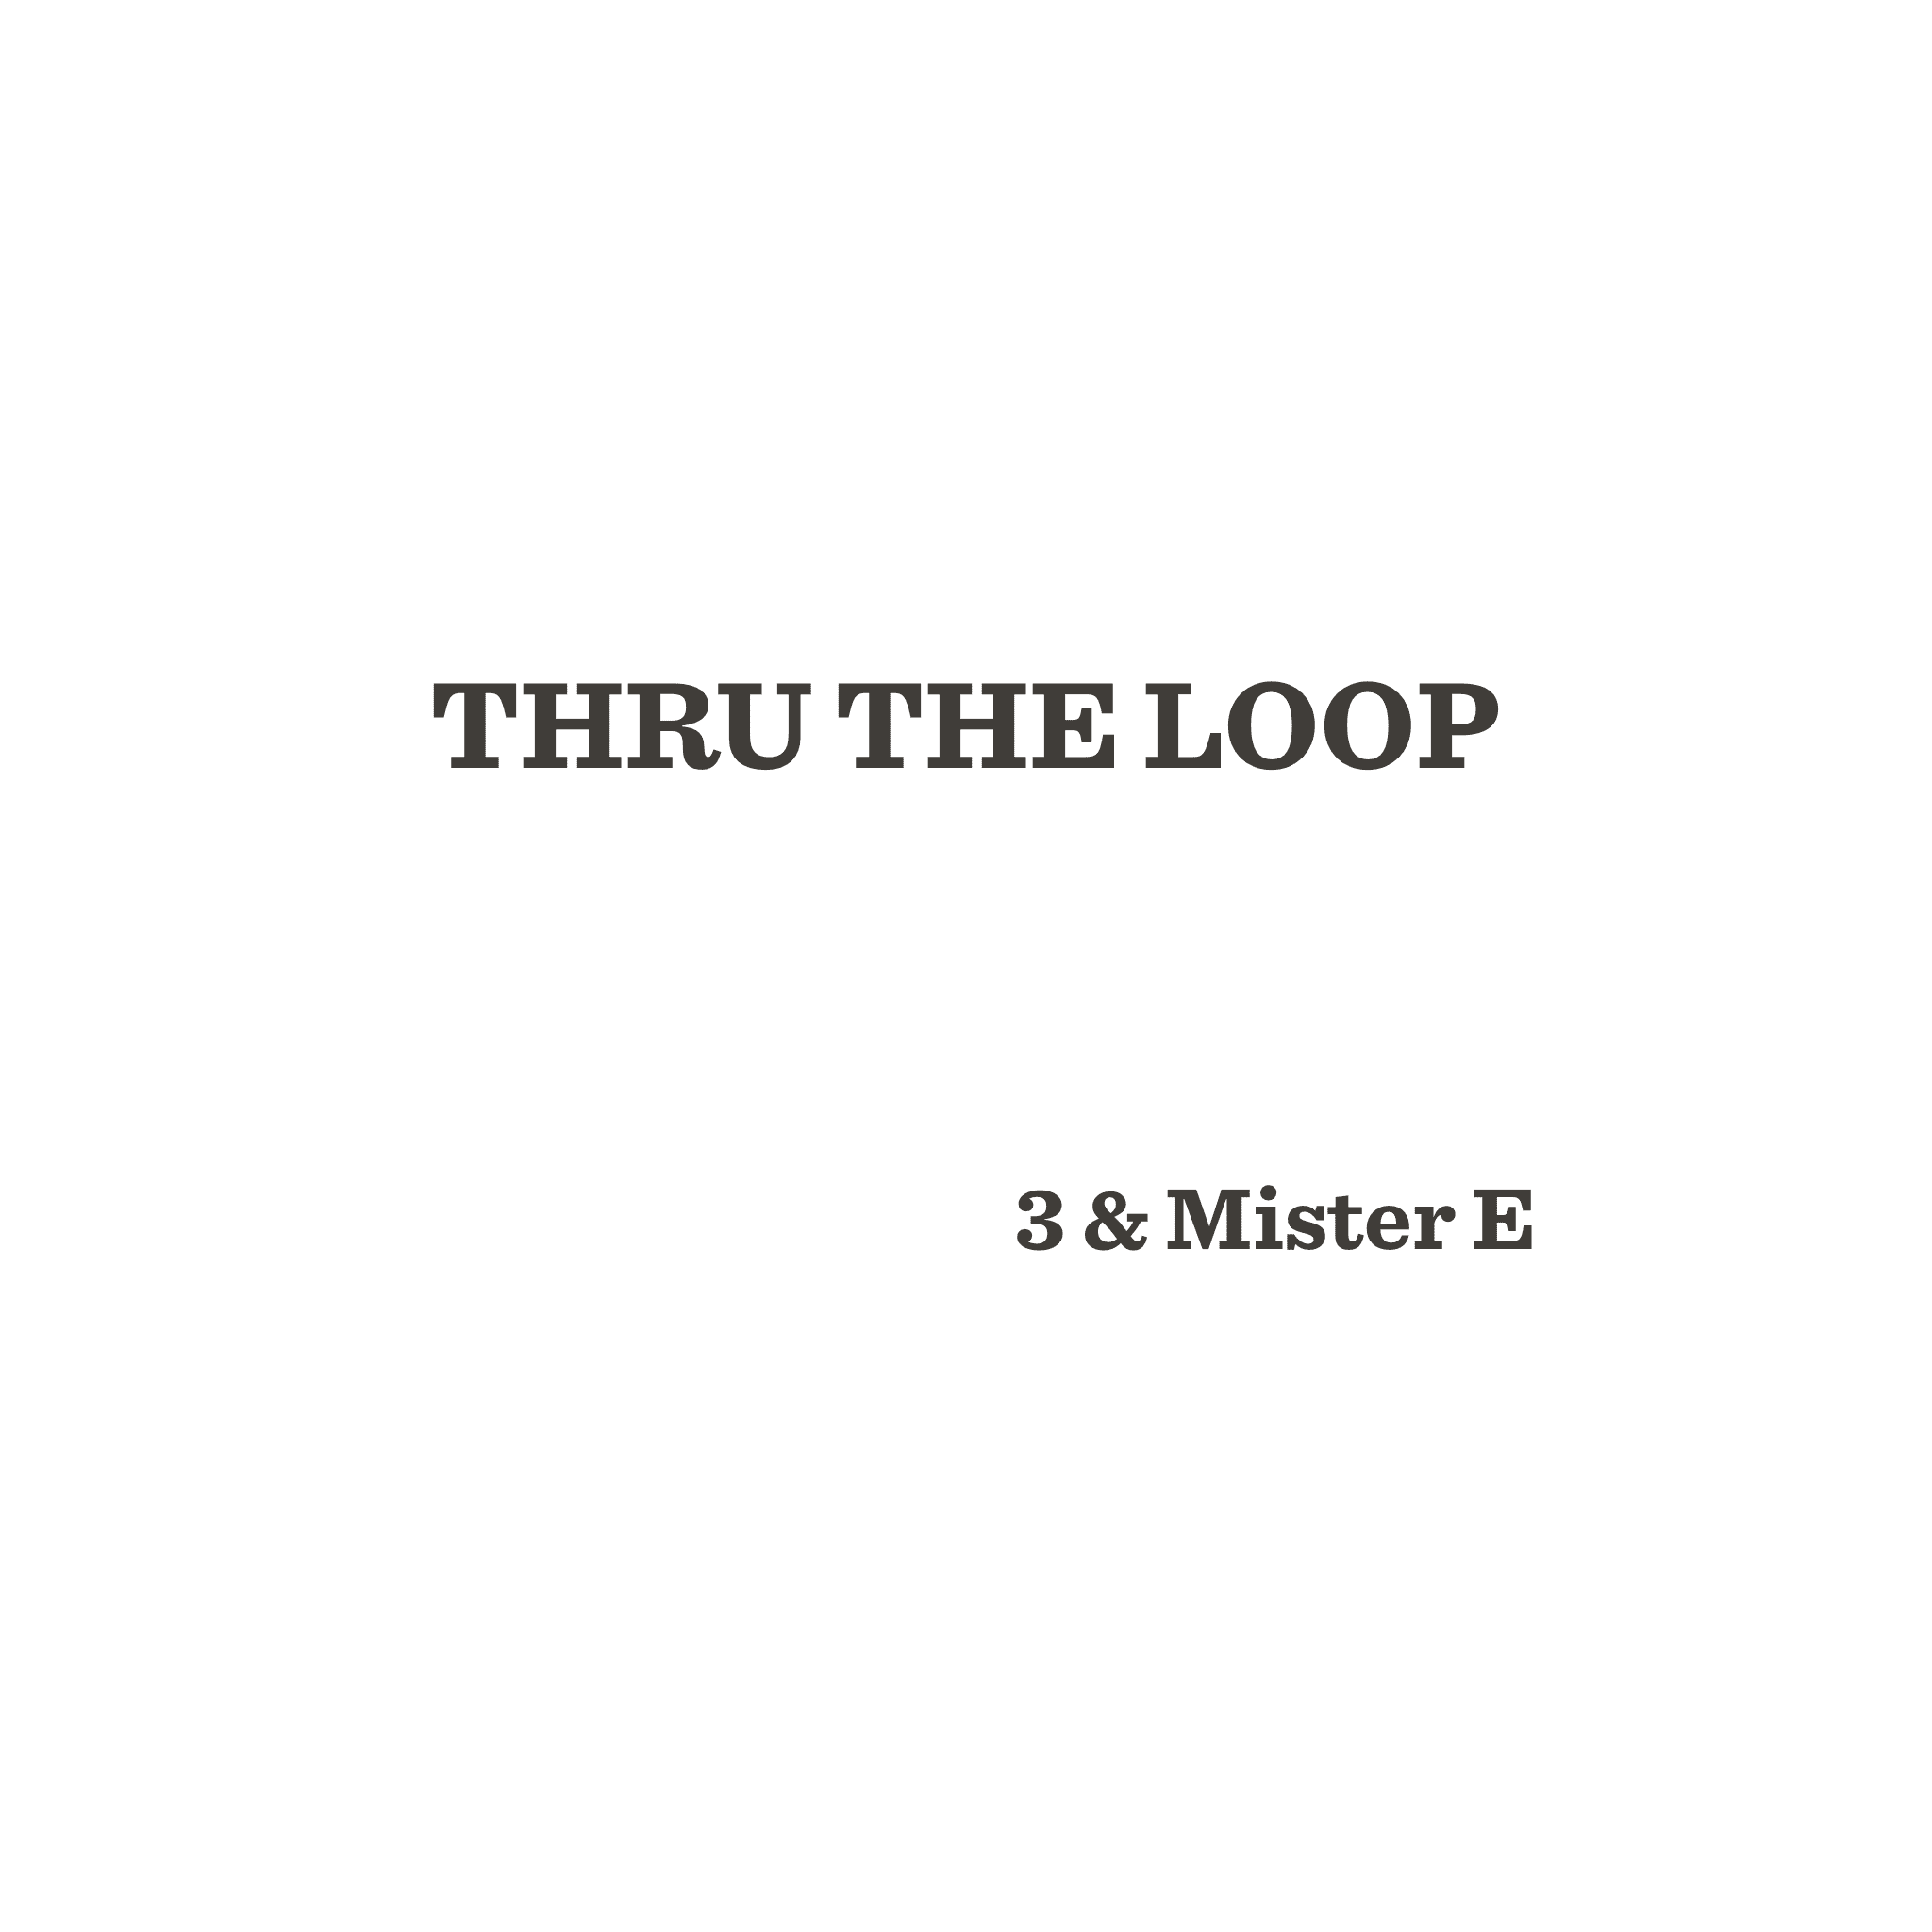 3 & Mister E Release Prelude Project "Thru The Loop"